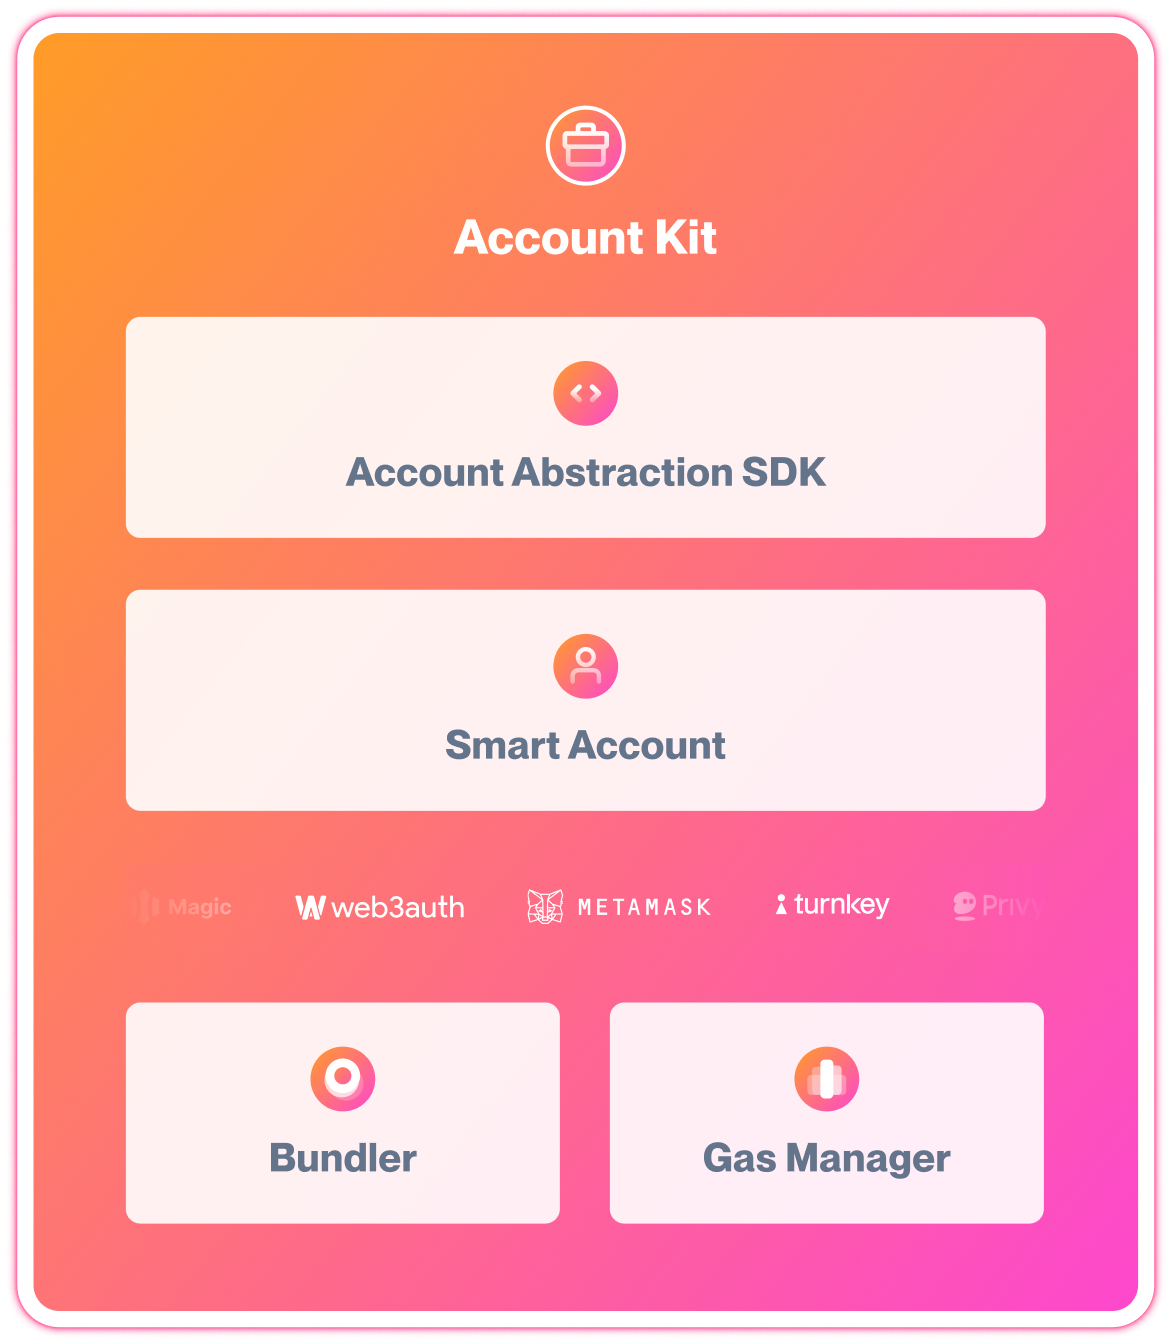 Account Kit is the complete toolkit